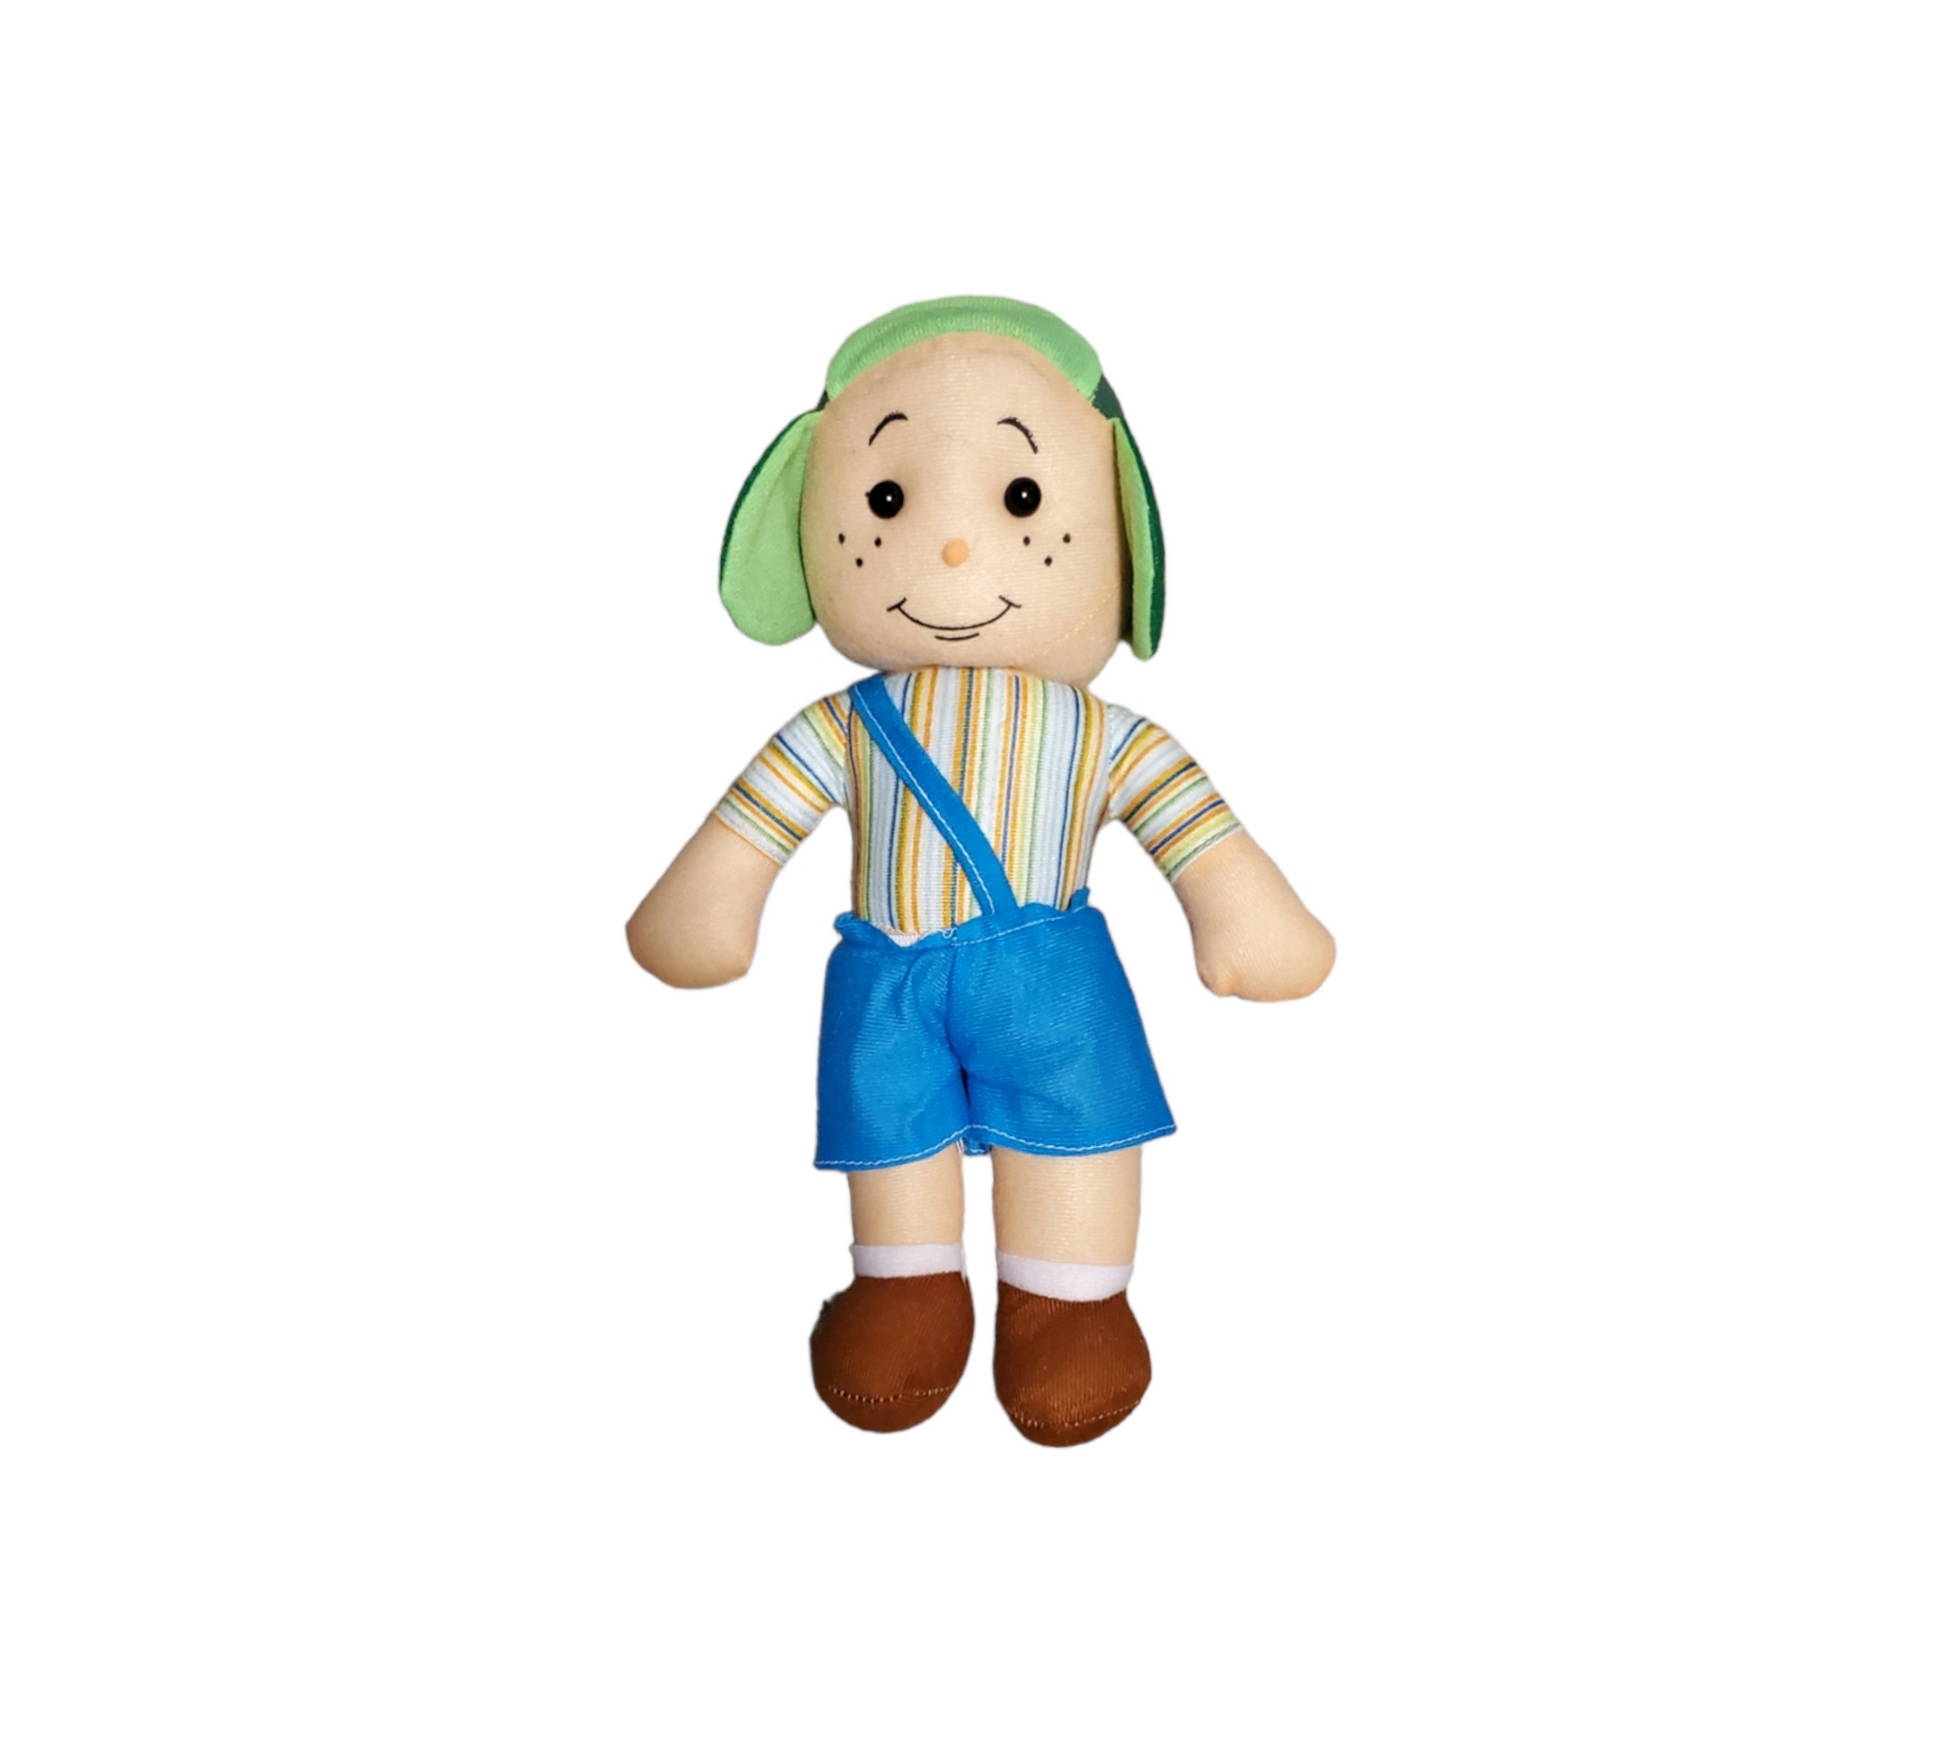 Cupid Beauty Supplies Cupid Beauty Supplies One Size Plush Toys El Chavo Del 8 Plush Toy, Color Varies